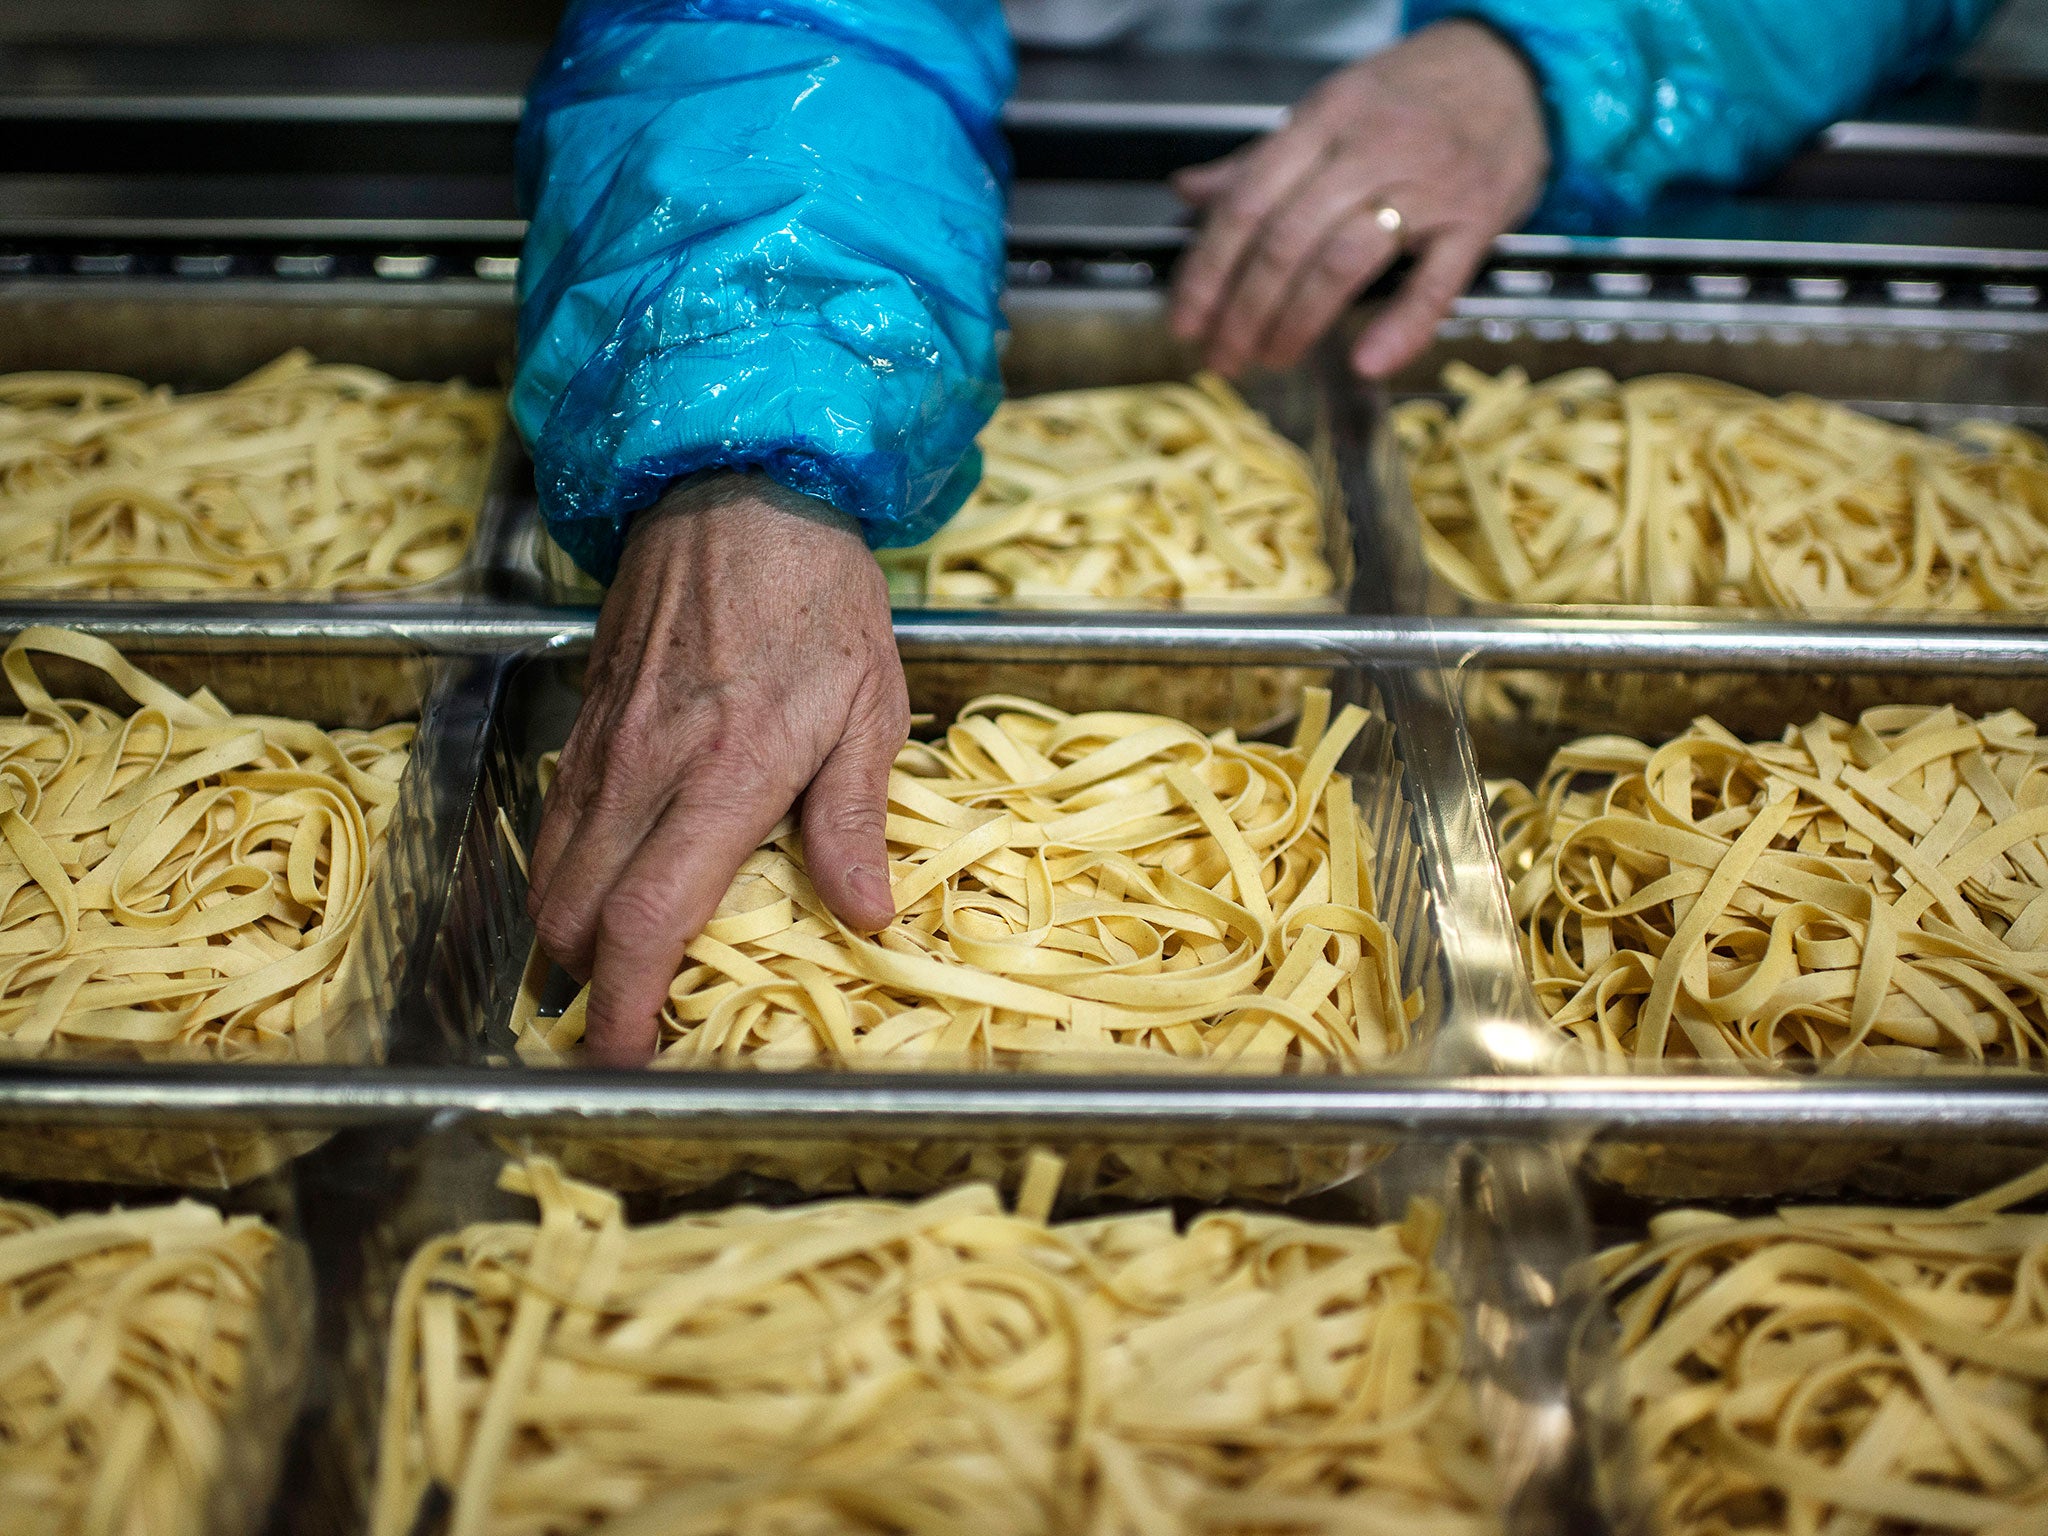 Claims that votes in Sicily were traded wholesale for bags of pasta, or for €5 (£3.60) each, have added to a building political storm over corruption